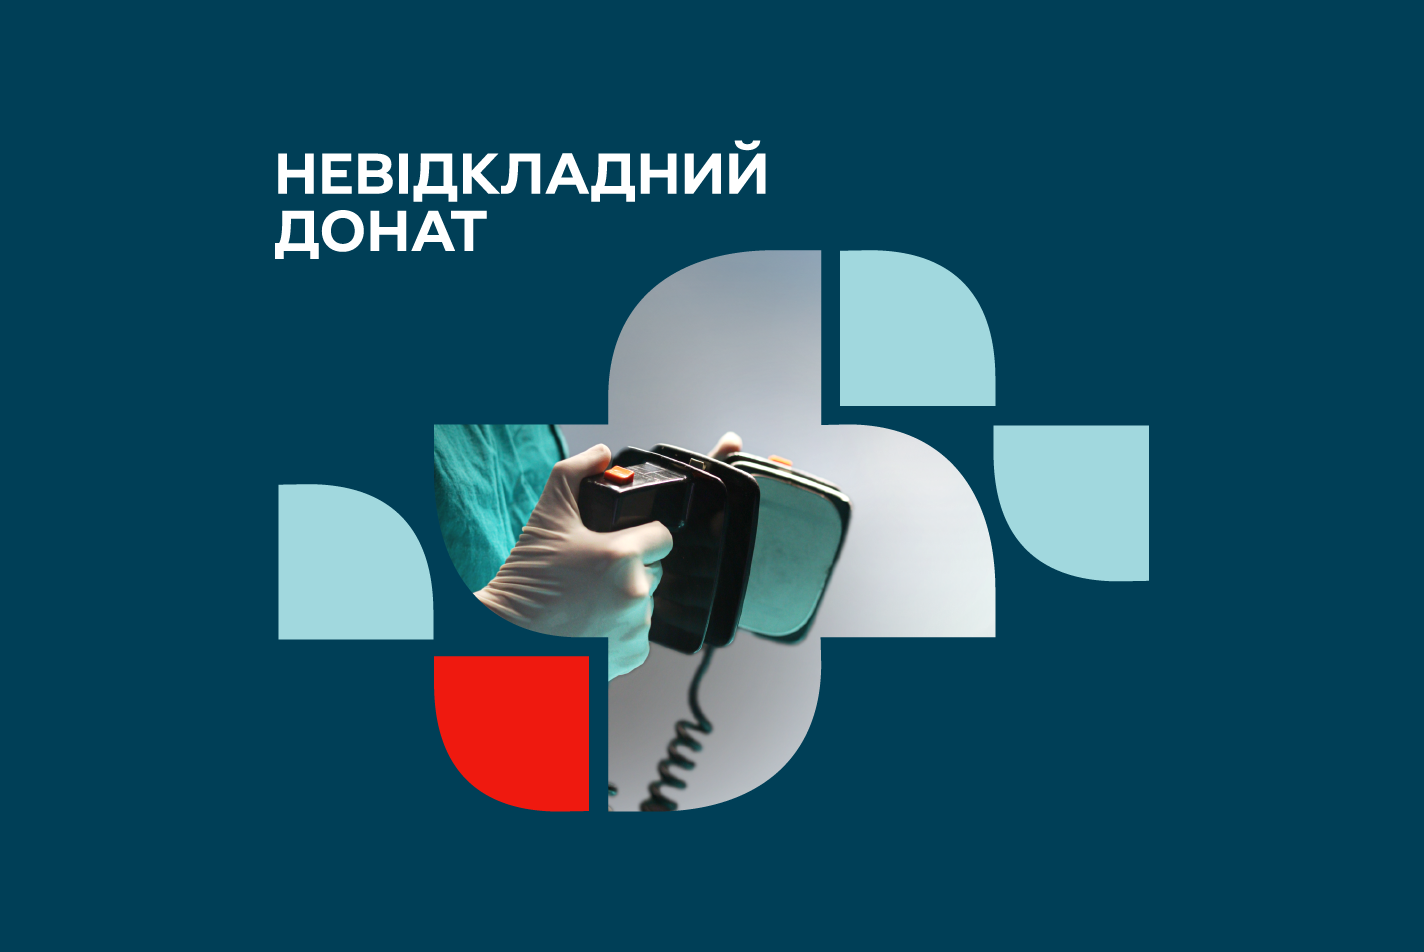 Assistance to hospitals and medical institutions of Ukraine